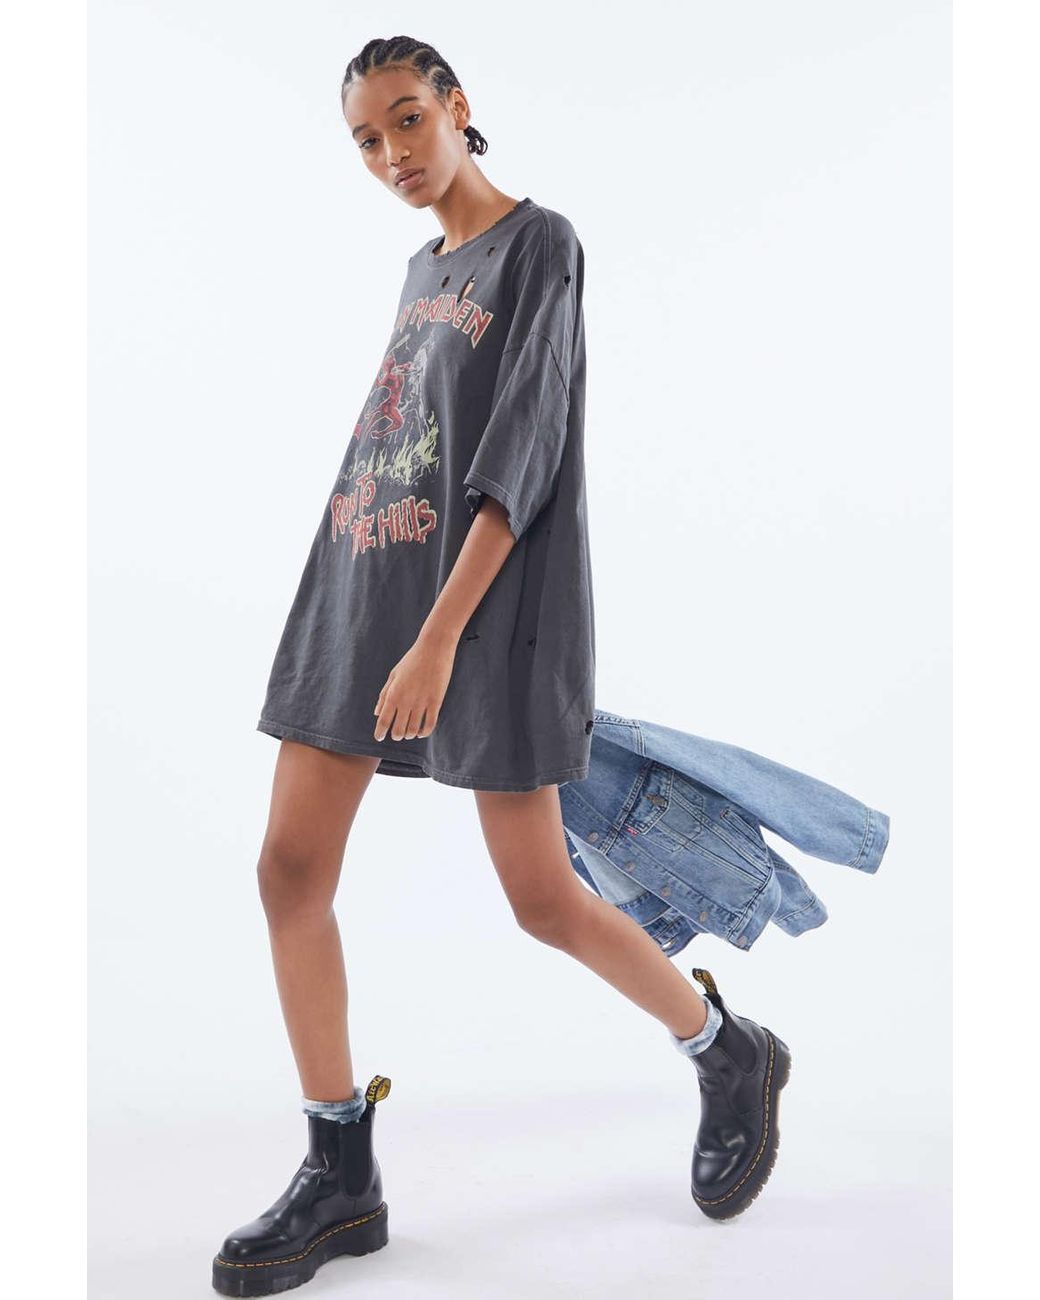 Outfitters Iron Maiden Run To The Hills Distressed Dress | Lyst